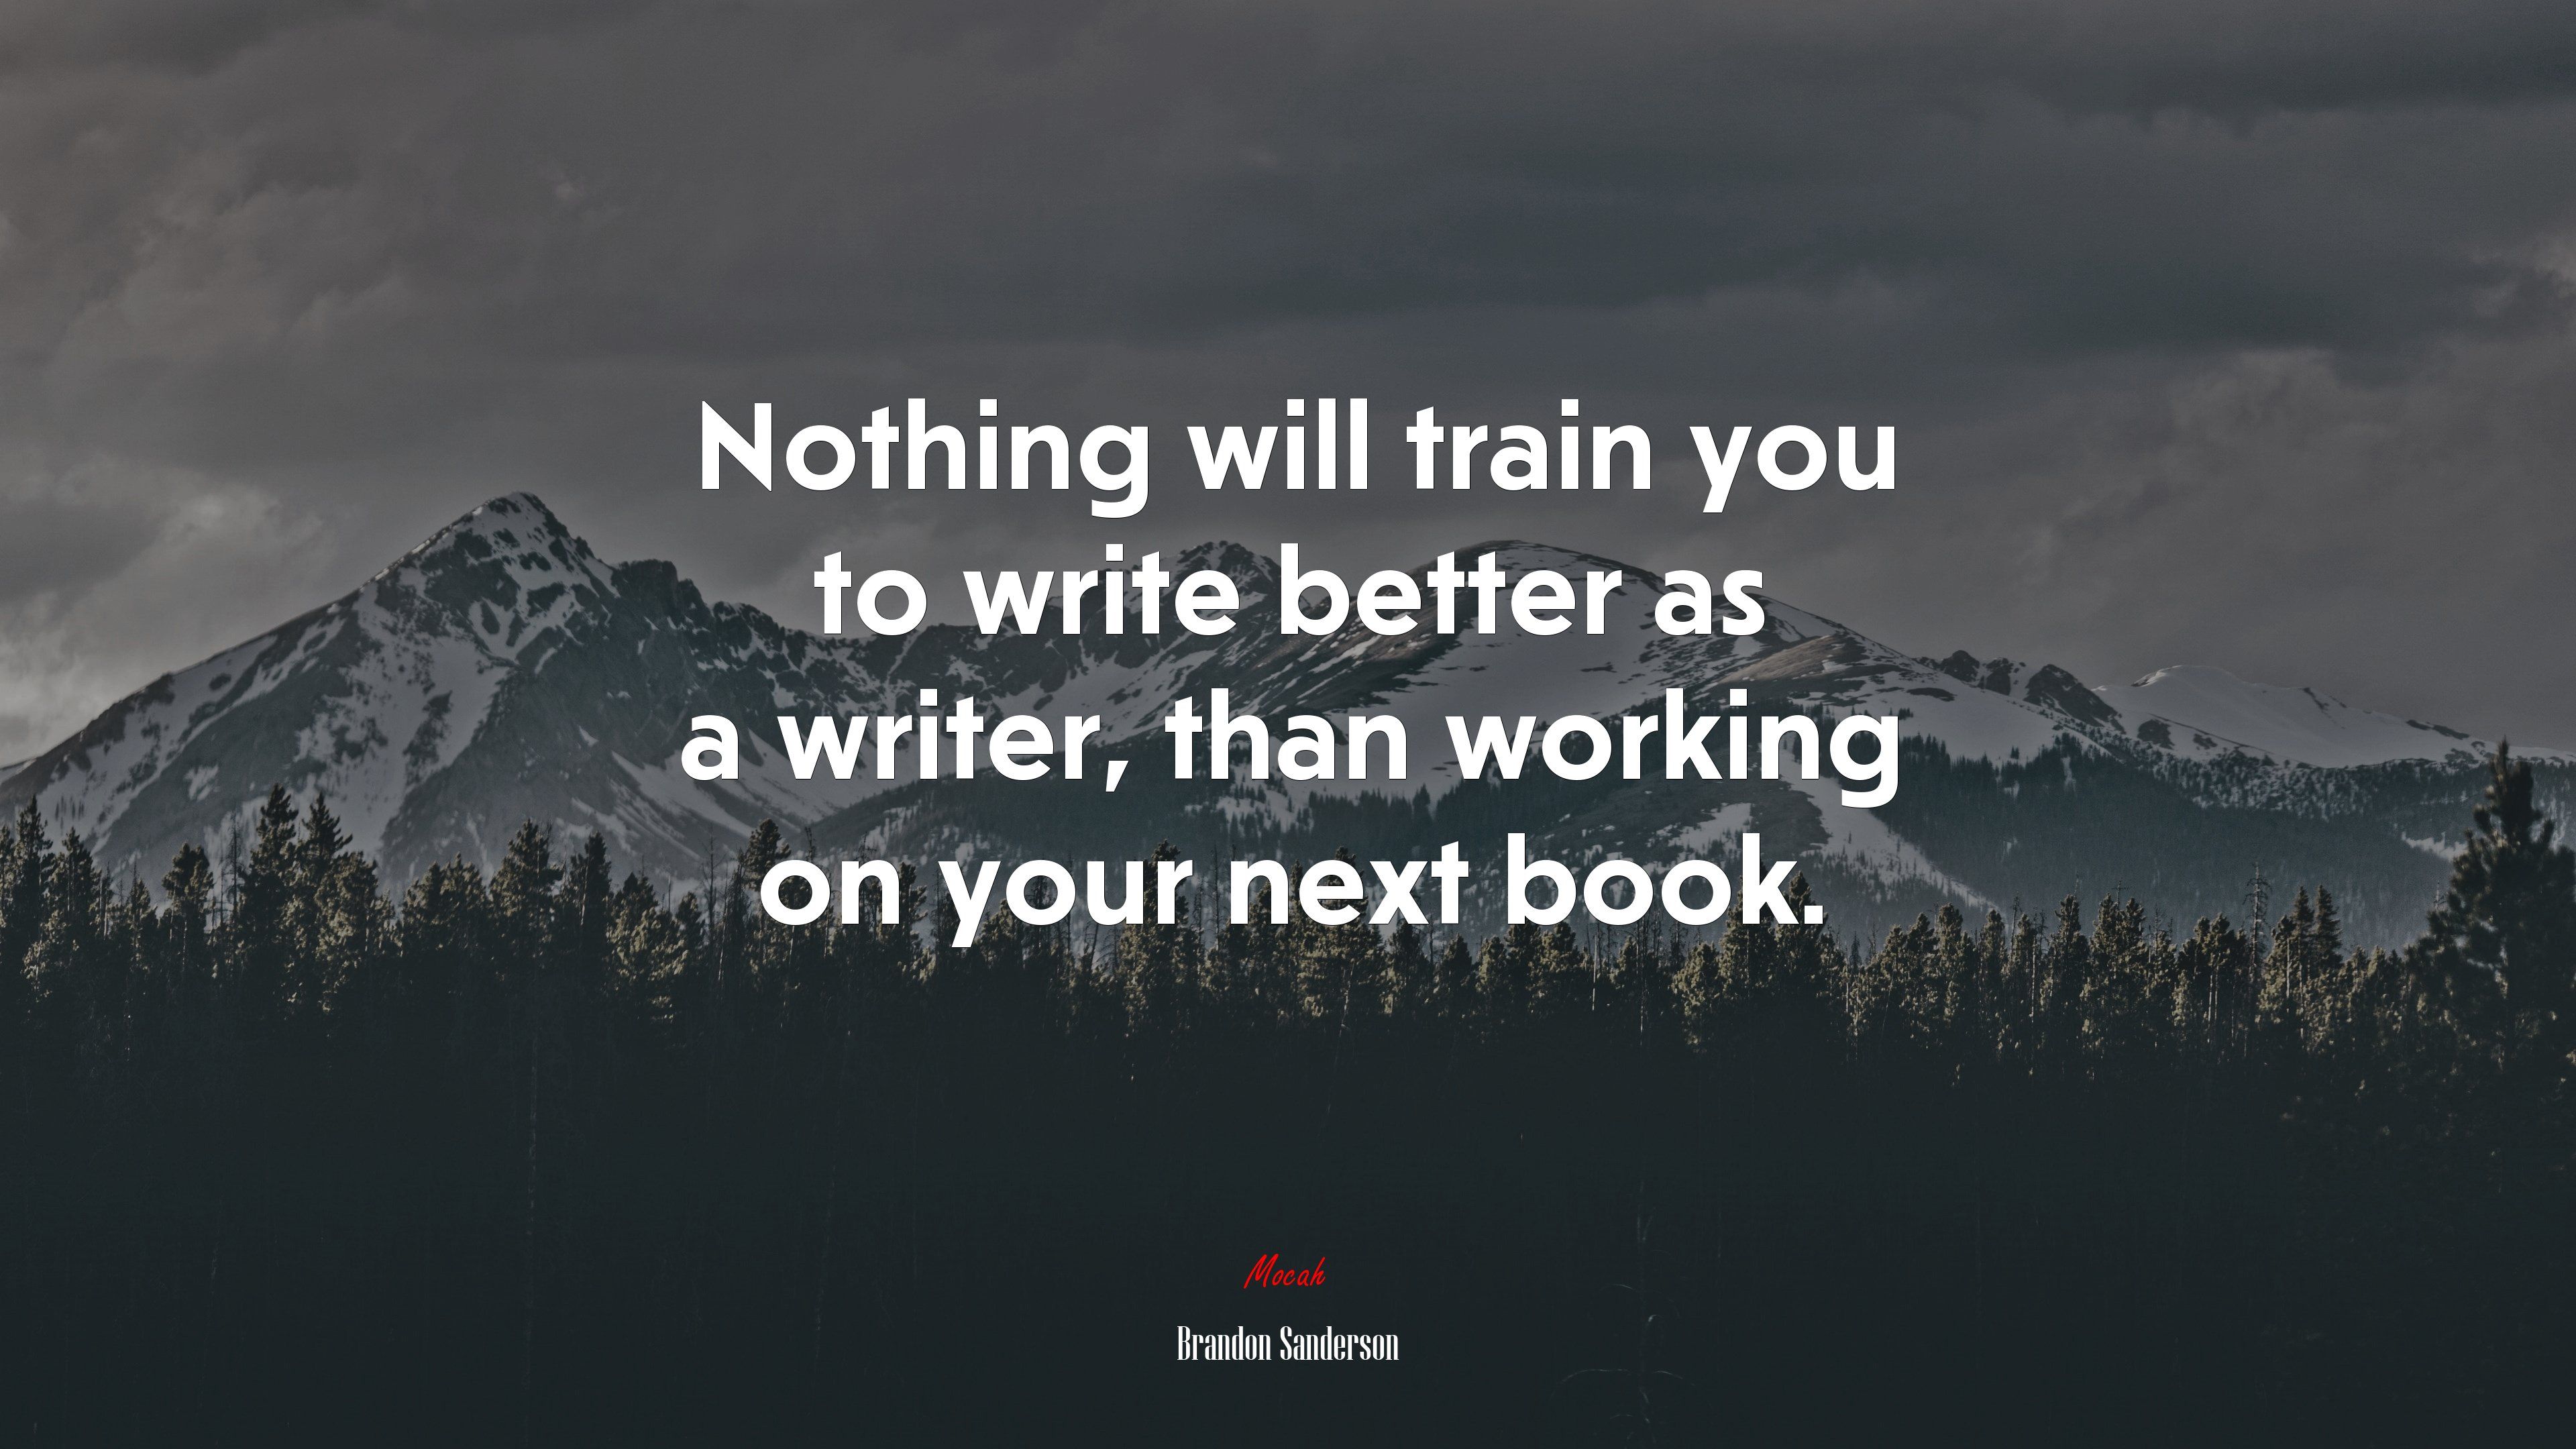 Nothing will train you to write better as a writer, than working on your next book. Brandon Sanderson quote, 4k wallpaper. Mocah.org HD Desktop Wallpaper